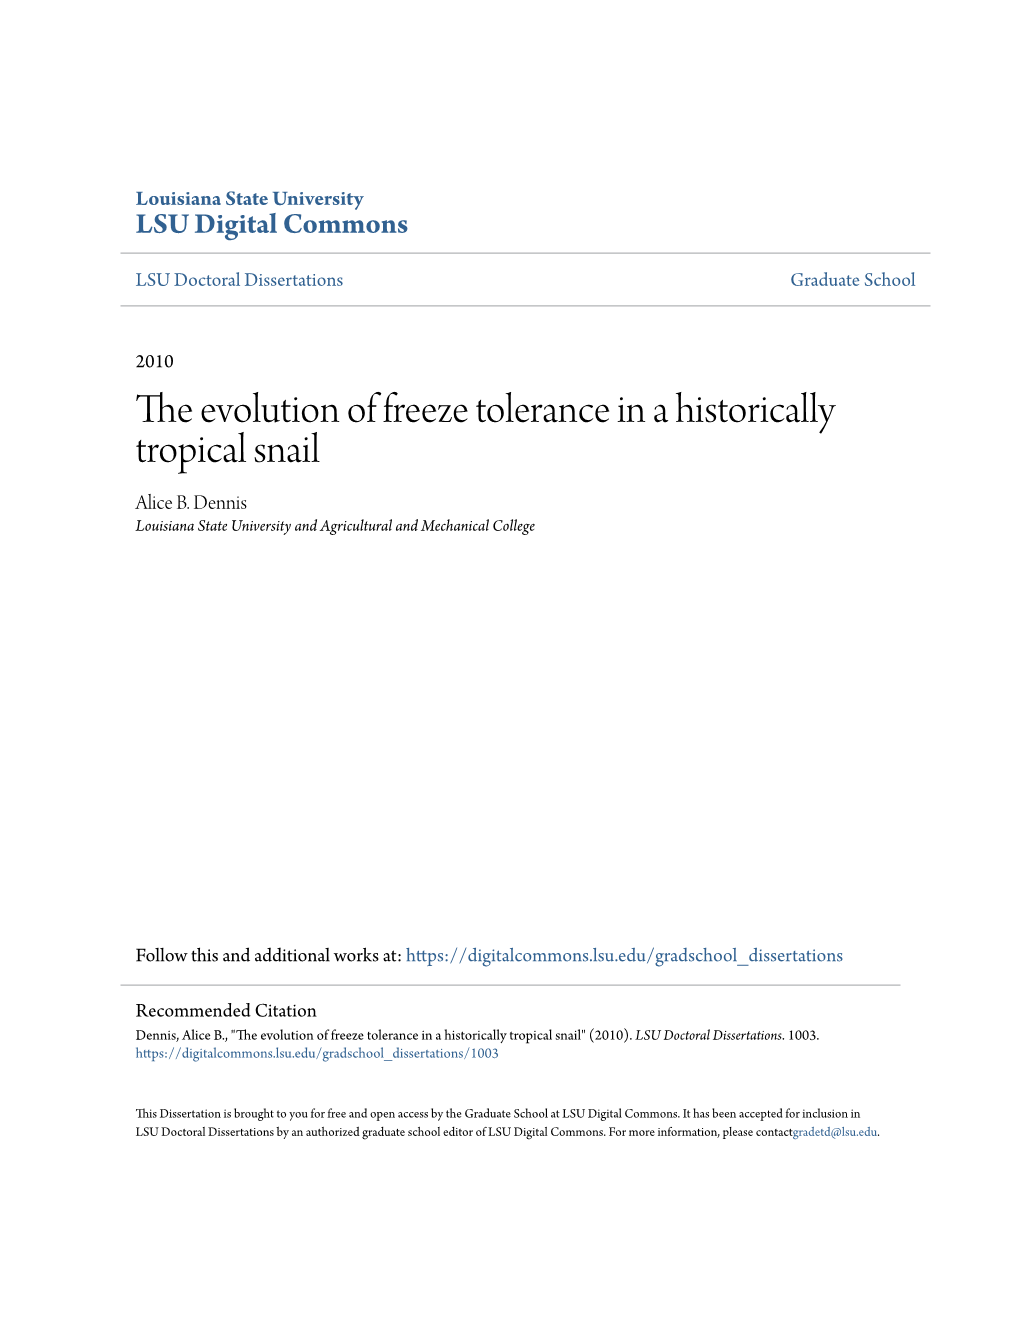 The Evolution of Freeze Tolerance in a Historically Tropical Snail Alice B